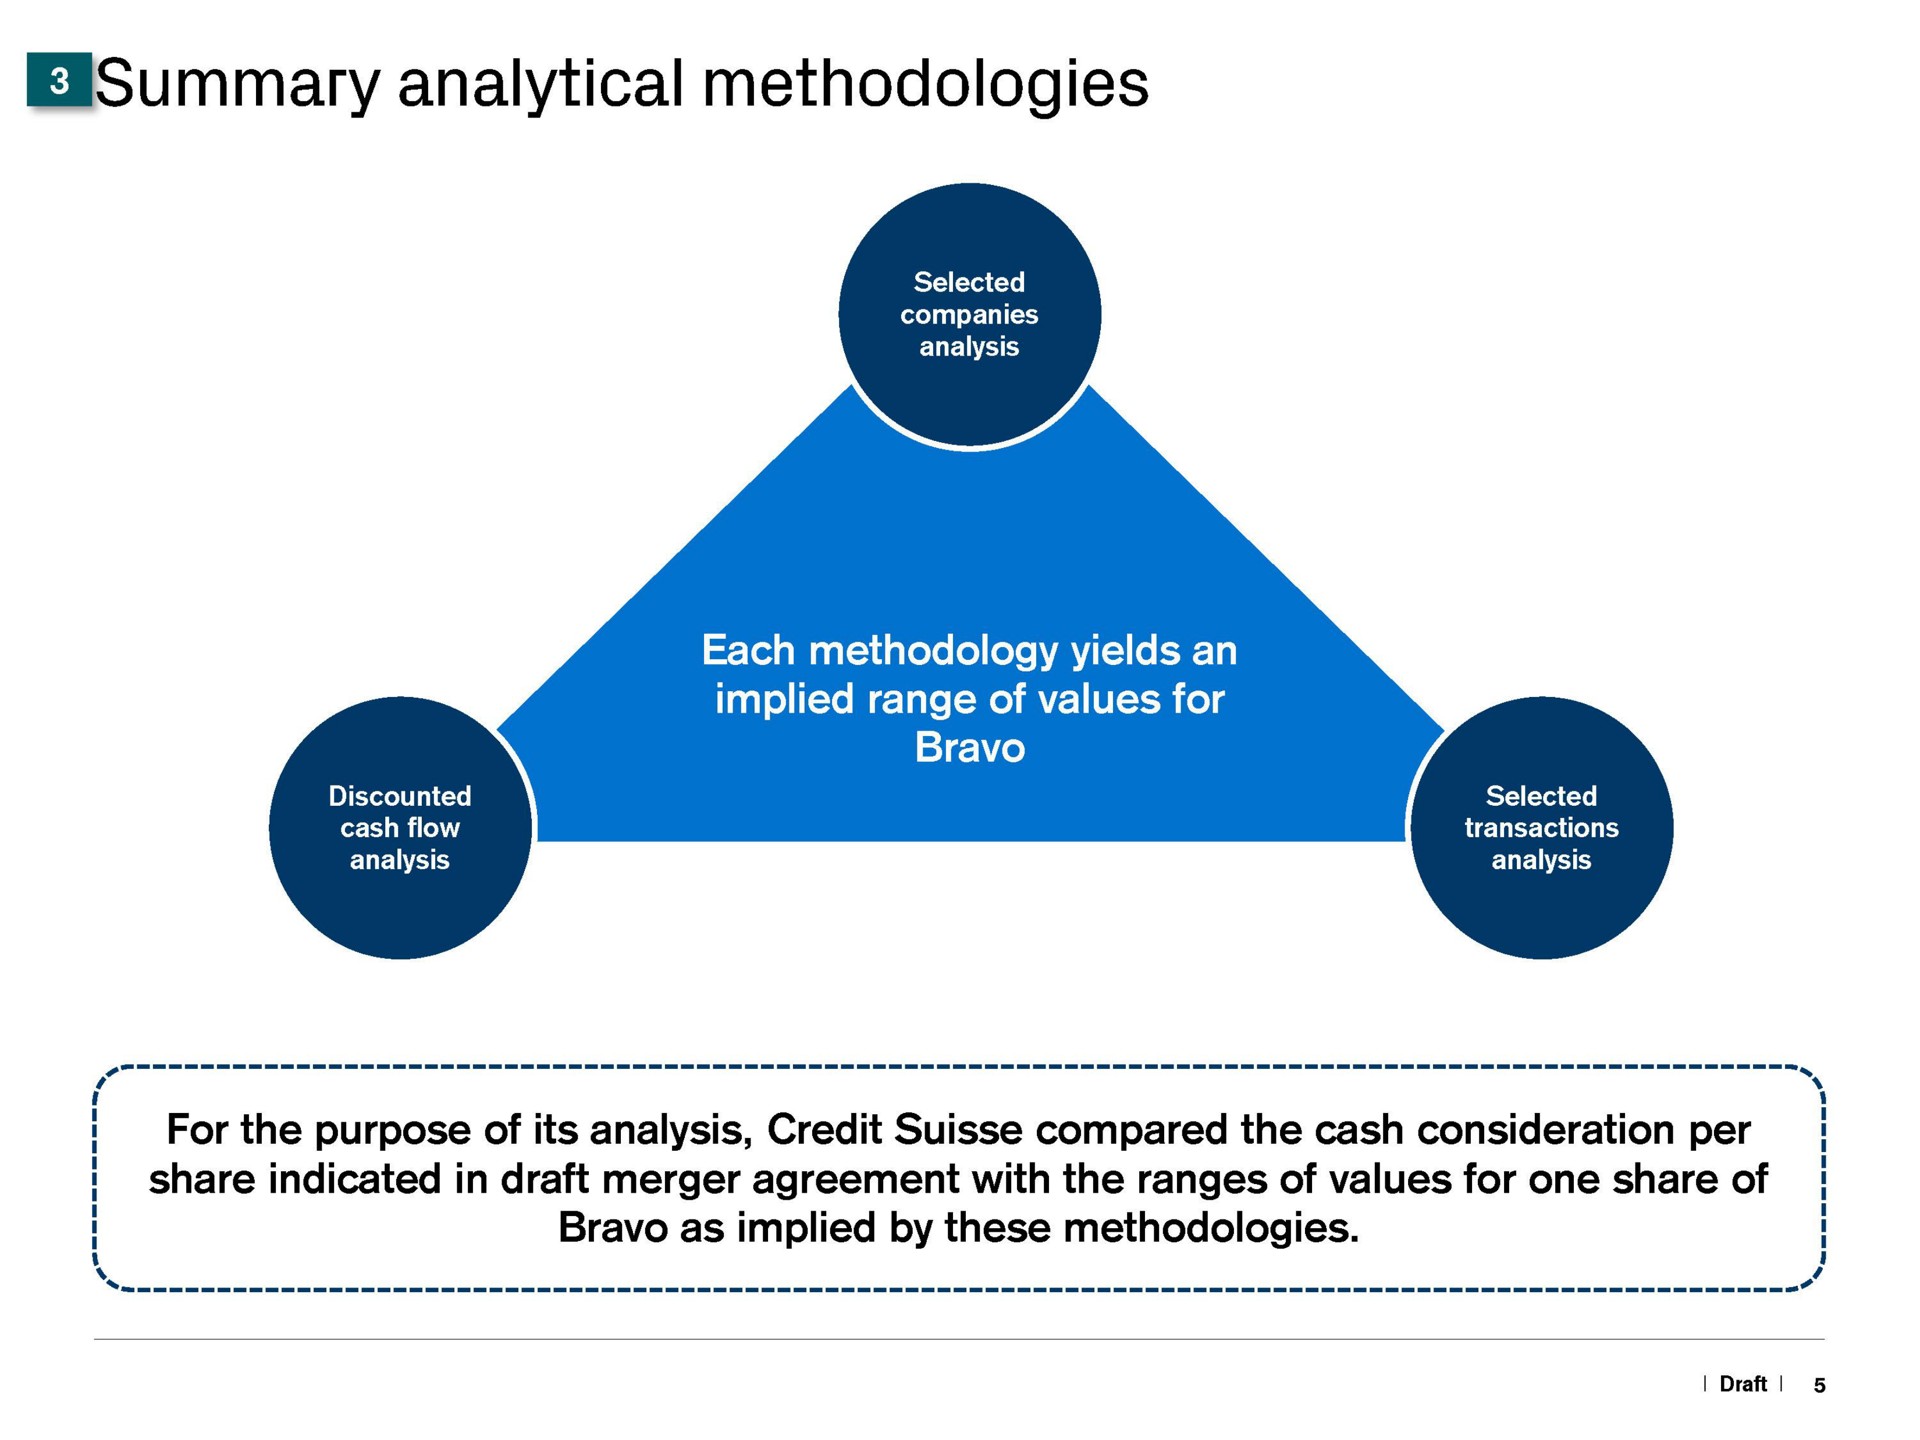 analytical methodologies each methodology yields an implied range of values for bravo for the purpose of its analysis credit compared the cash consideration per share indicated in draft merger agreement with the ranges of values for one share of bravo as implied by these methodologies | Credit Suisse